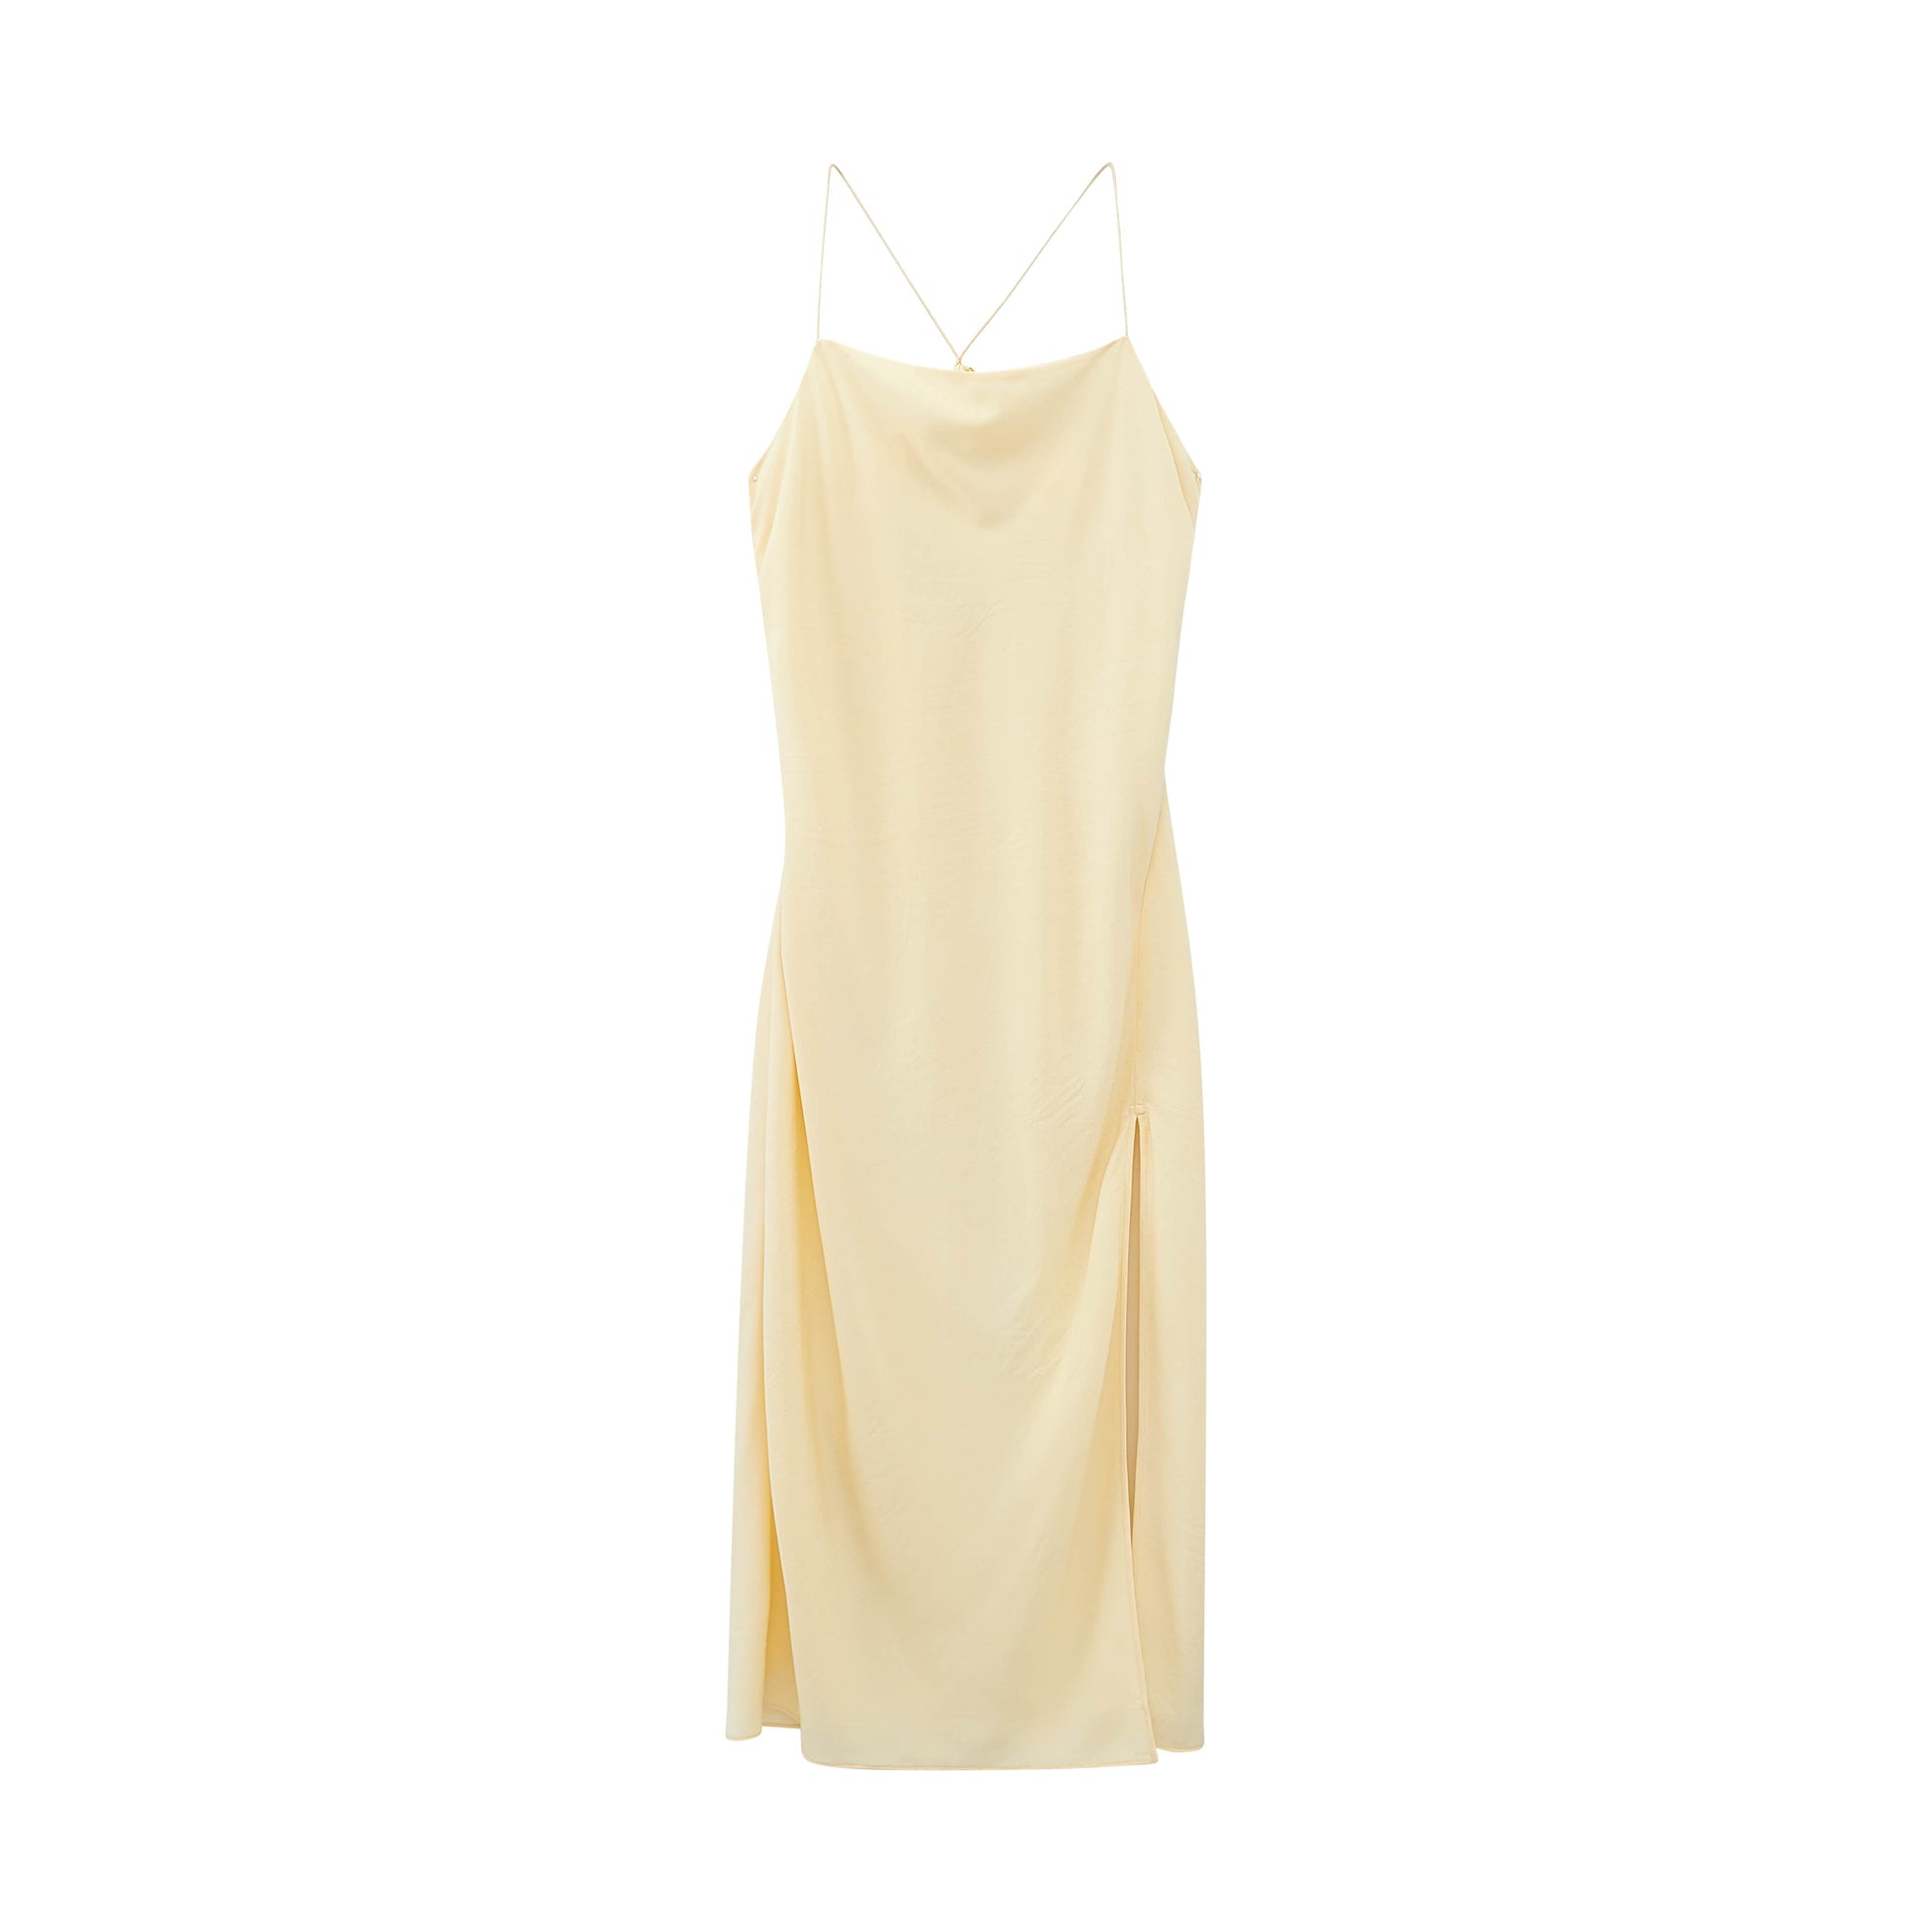 Flat lay image of front of cream colored dress with thin straps and high leg slits